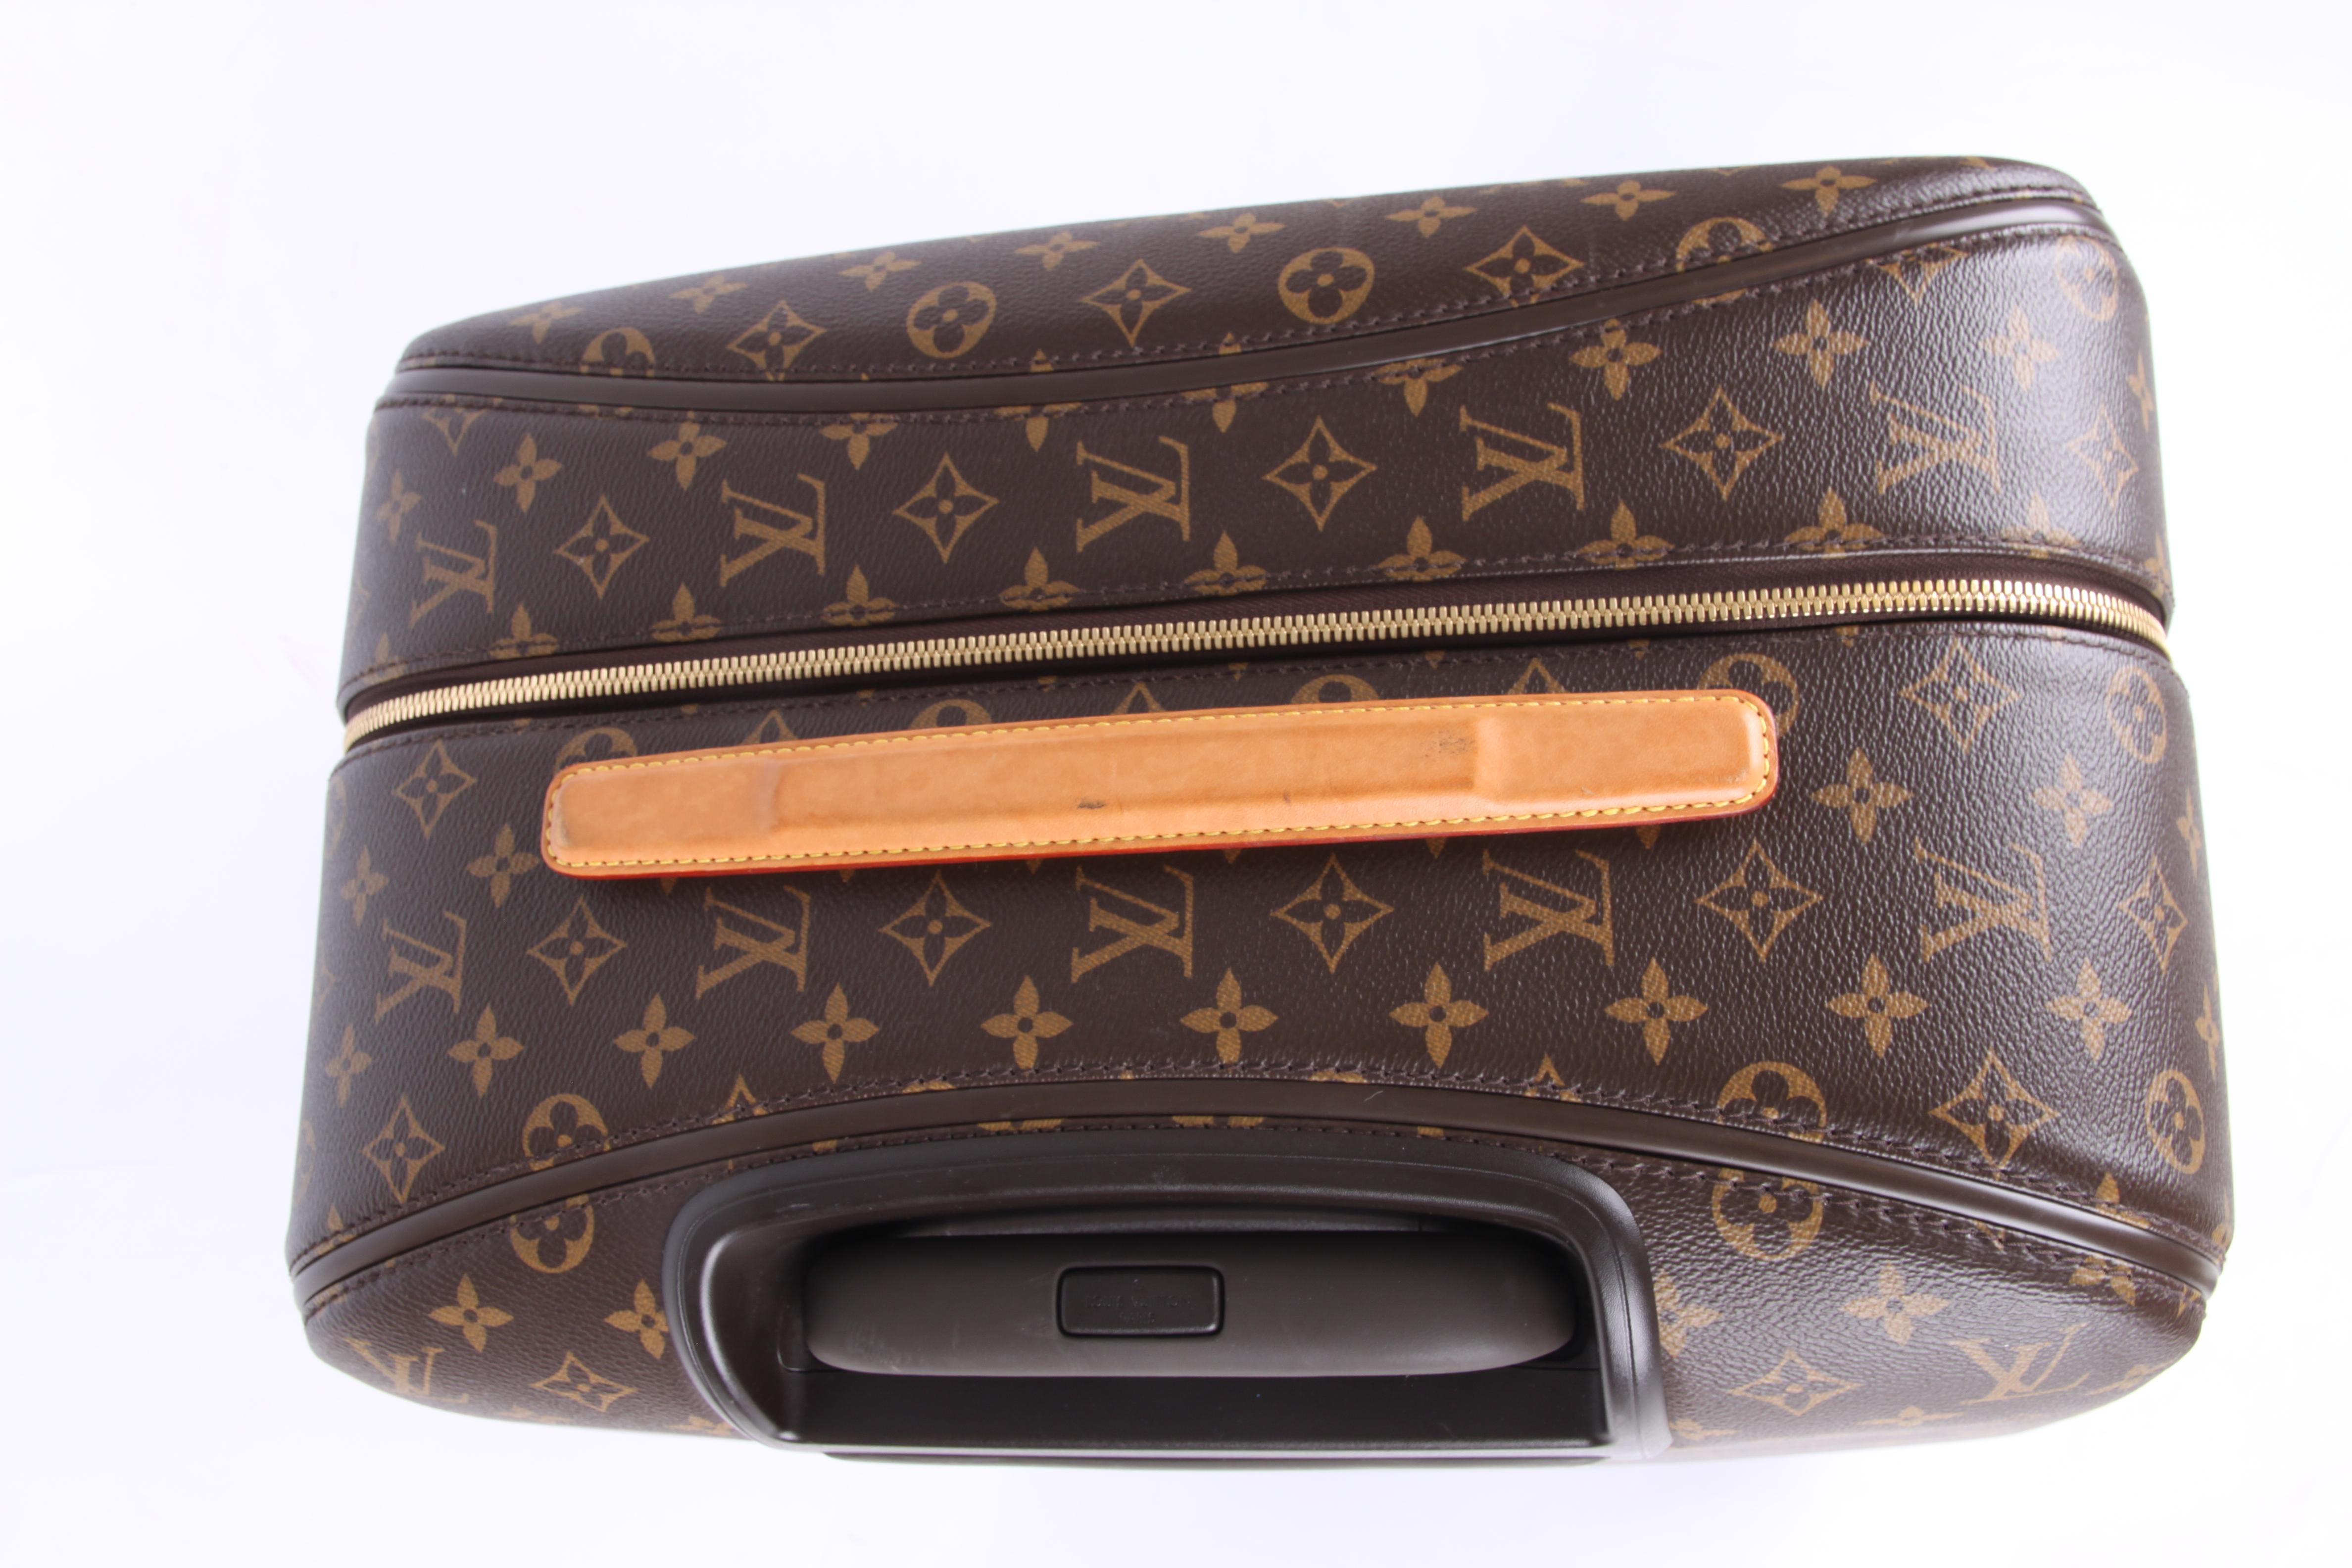   Louis Vuitton Monogram Zephyr 70 Rolling Luggage Bag Suitcase - brown   In Good Condition For Sale In Baarn, NL